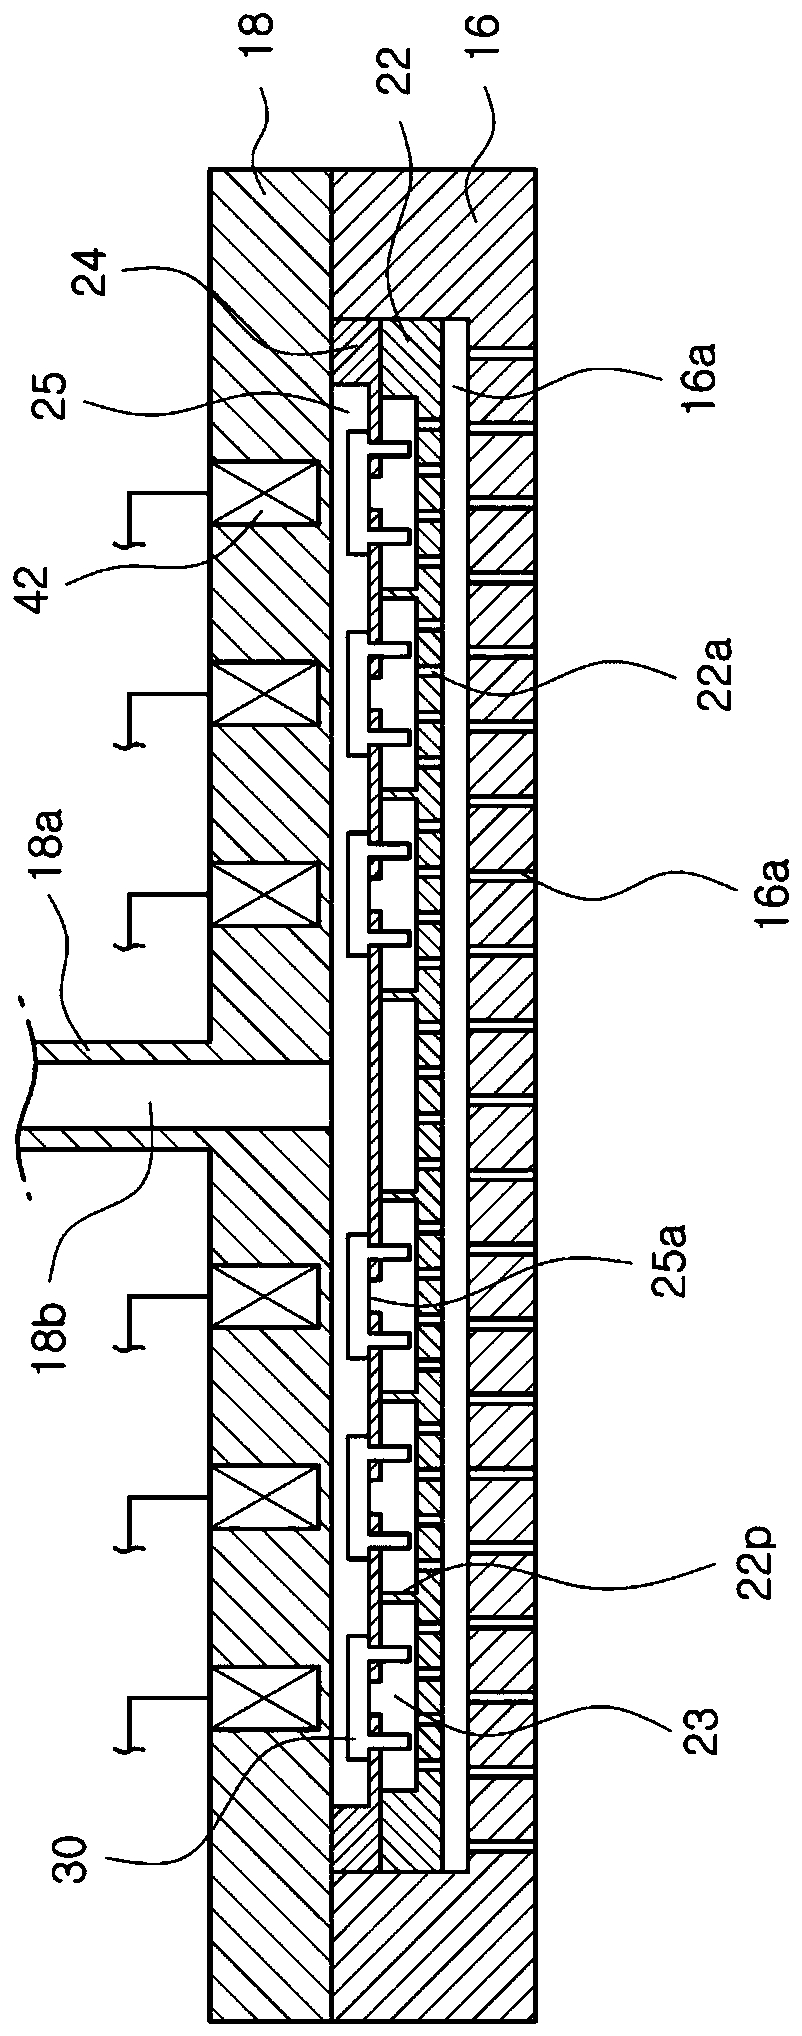 Showerhead and substrate processing apparatus